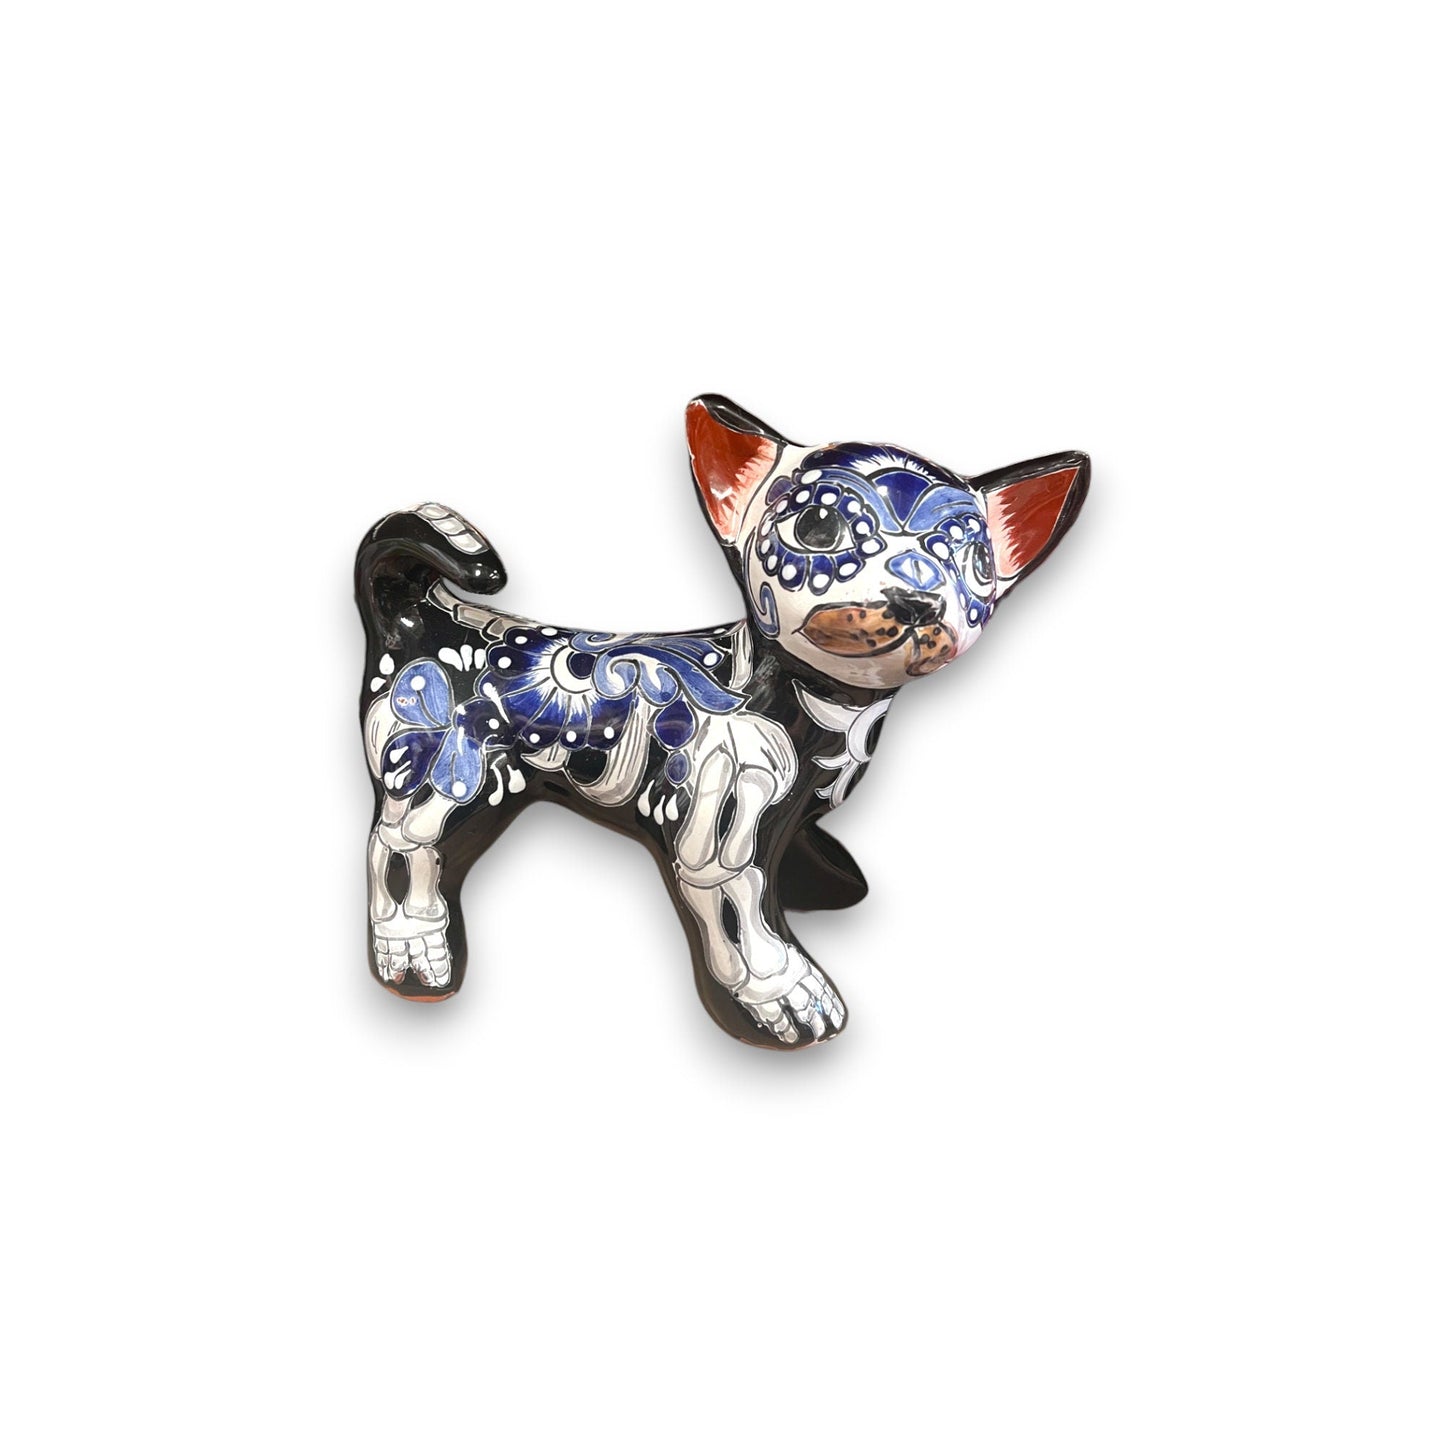 Handcrafted Talavera Chihuahua Statue | Medium Day of the Dead Pottery Art